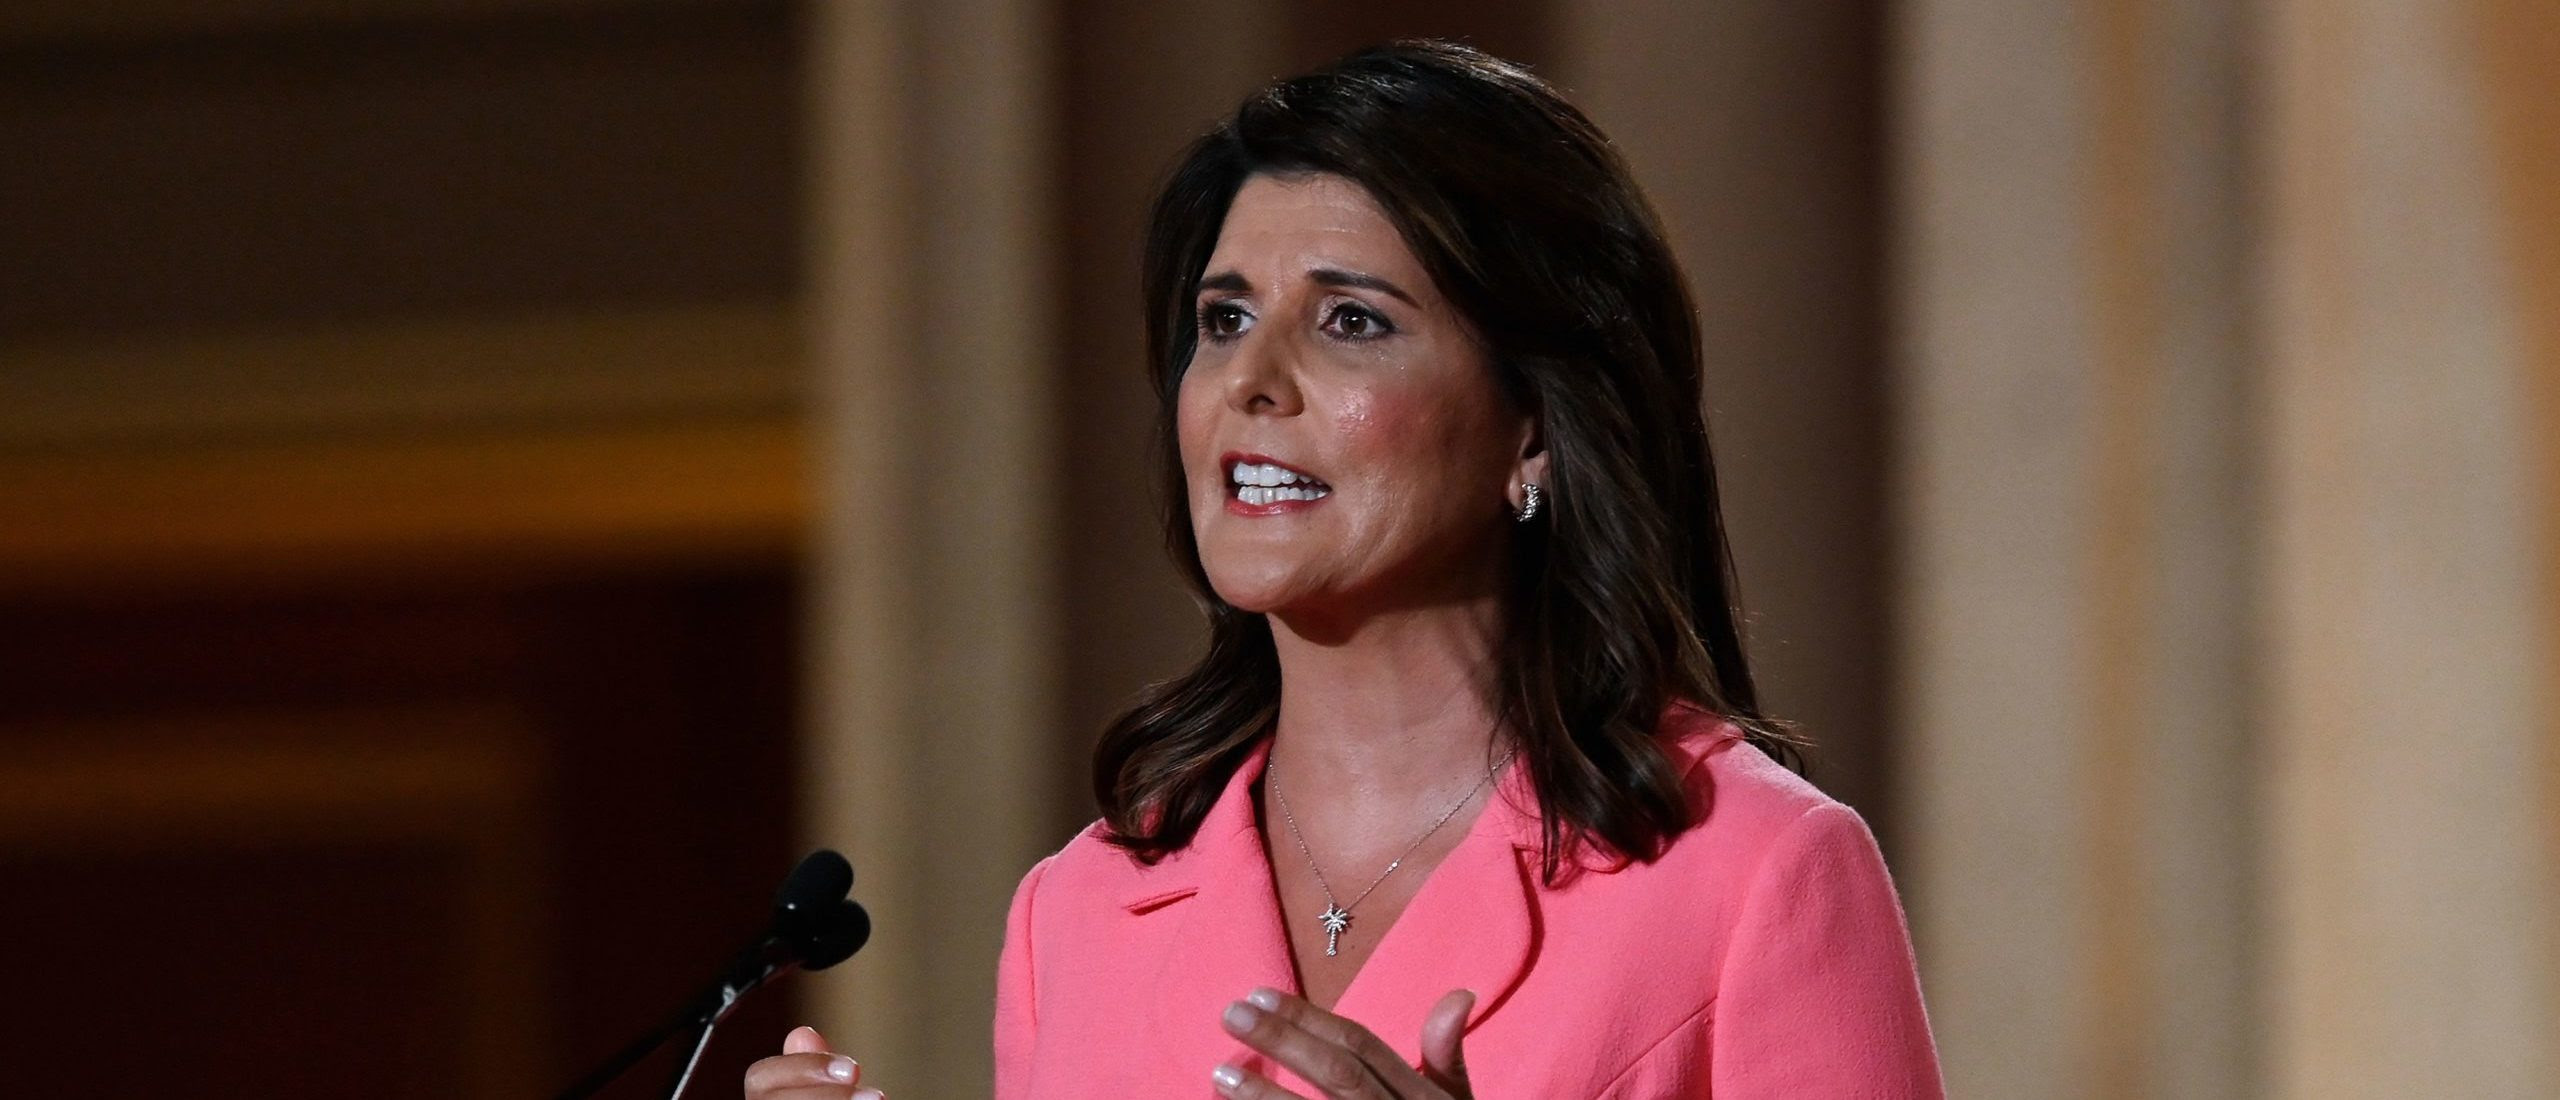 EXCLUSIVE: Here’s What Nikki Haley Sees As The Future Of The Republican Party